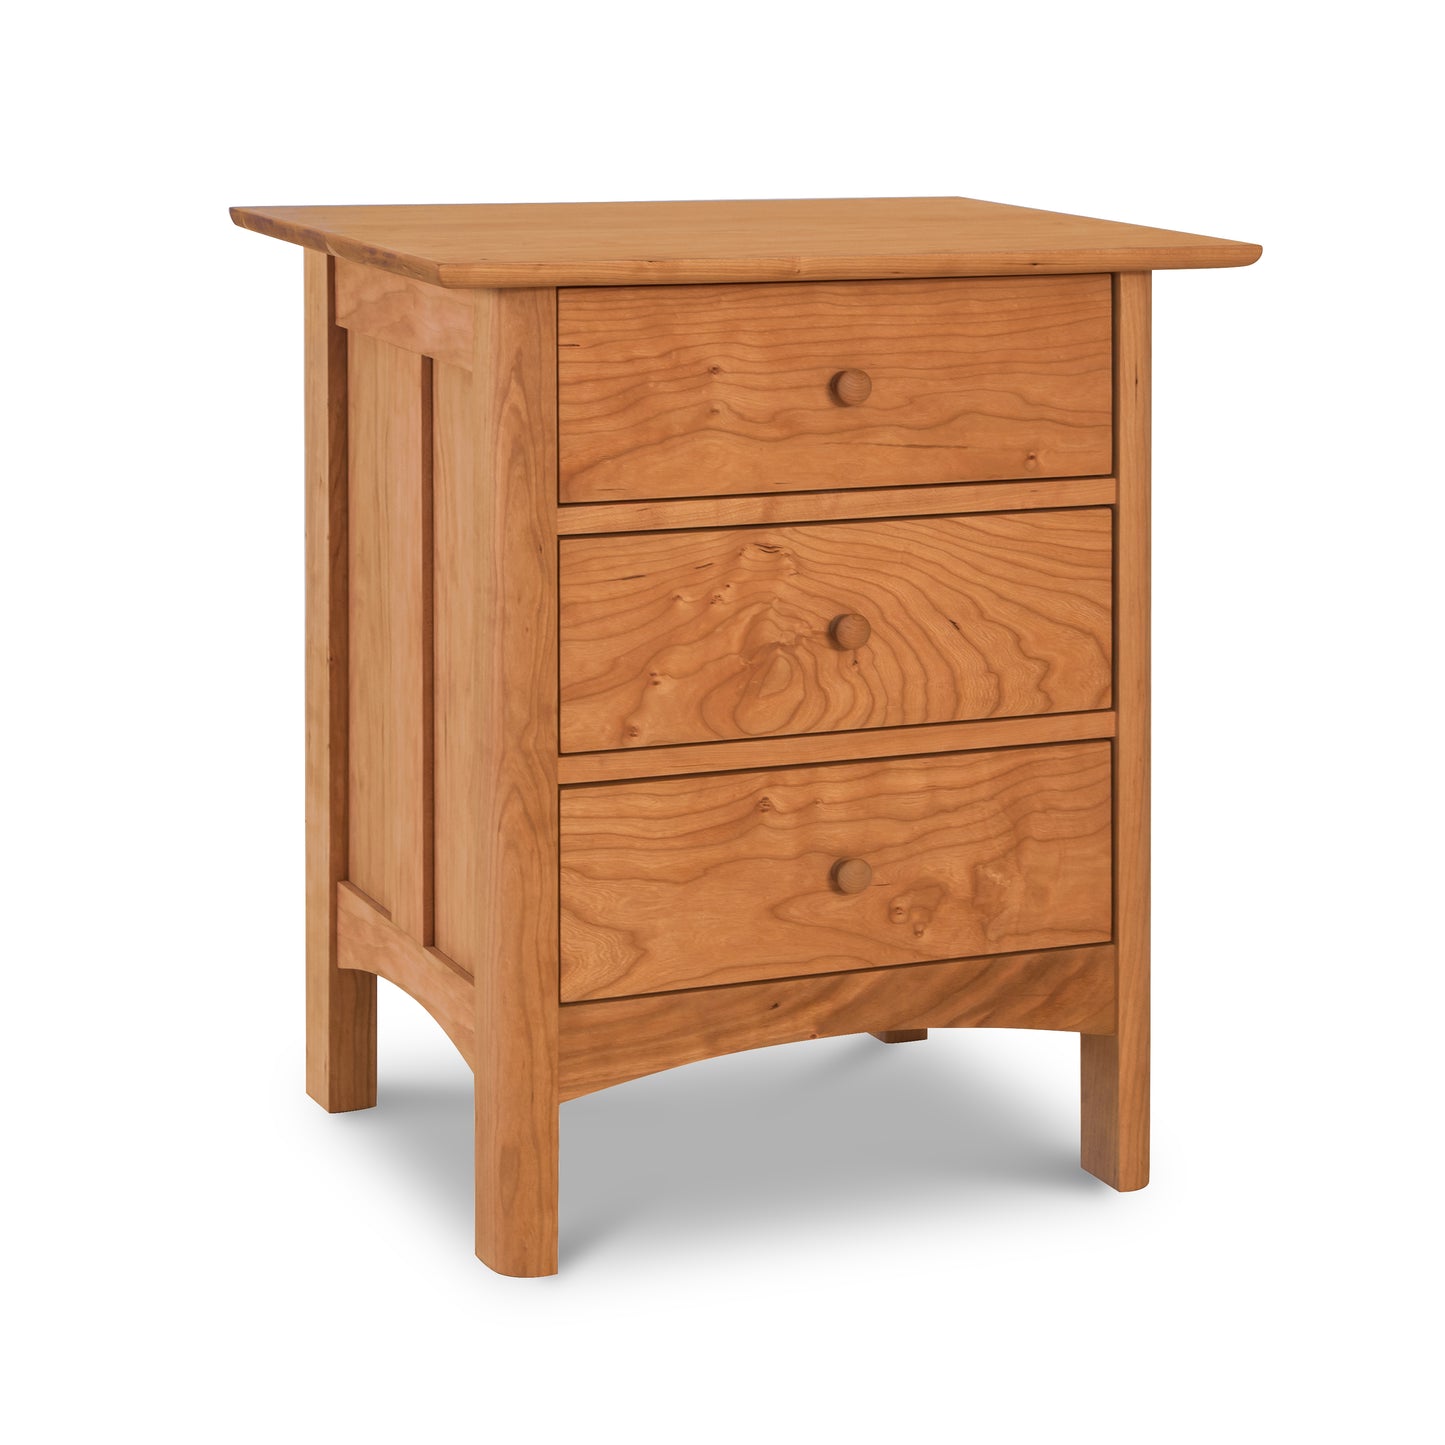 A luxury Heartwood Shaker 3-Drawer Nightstand, crafted in Vermont Furniture Designs style.